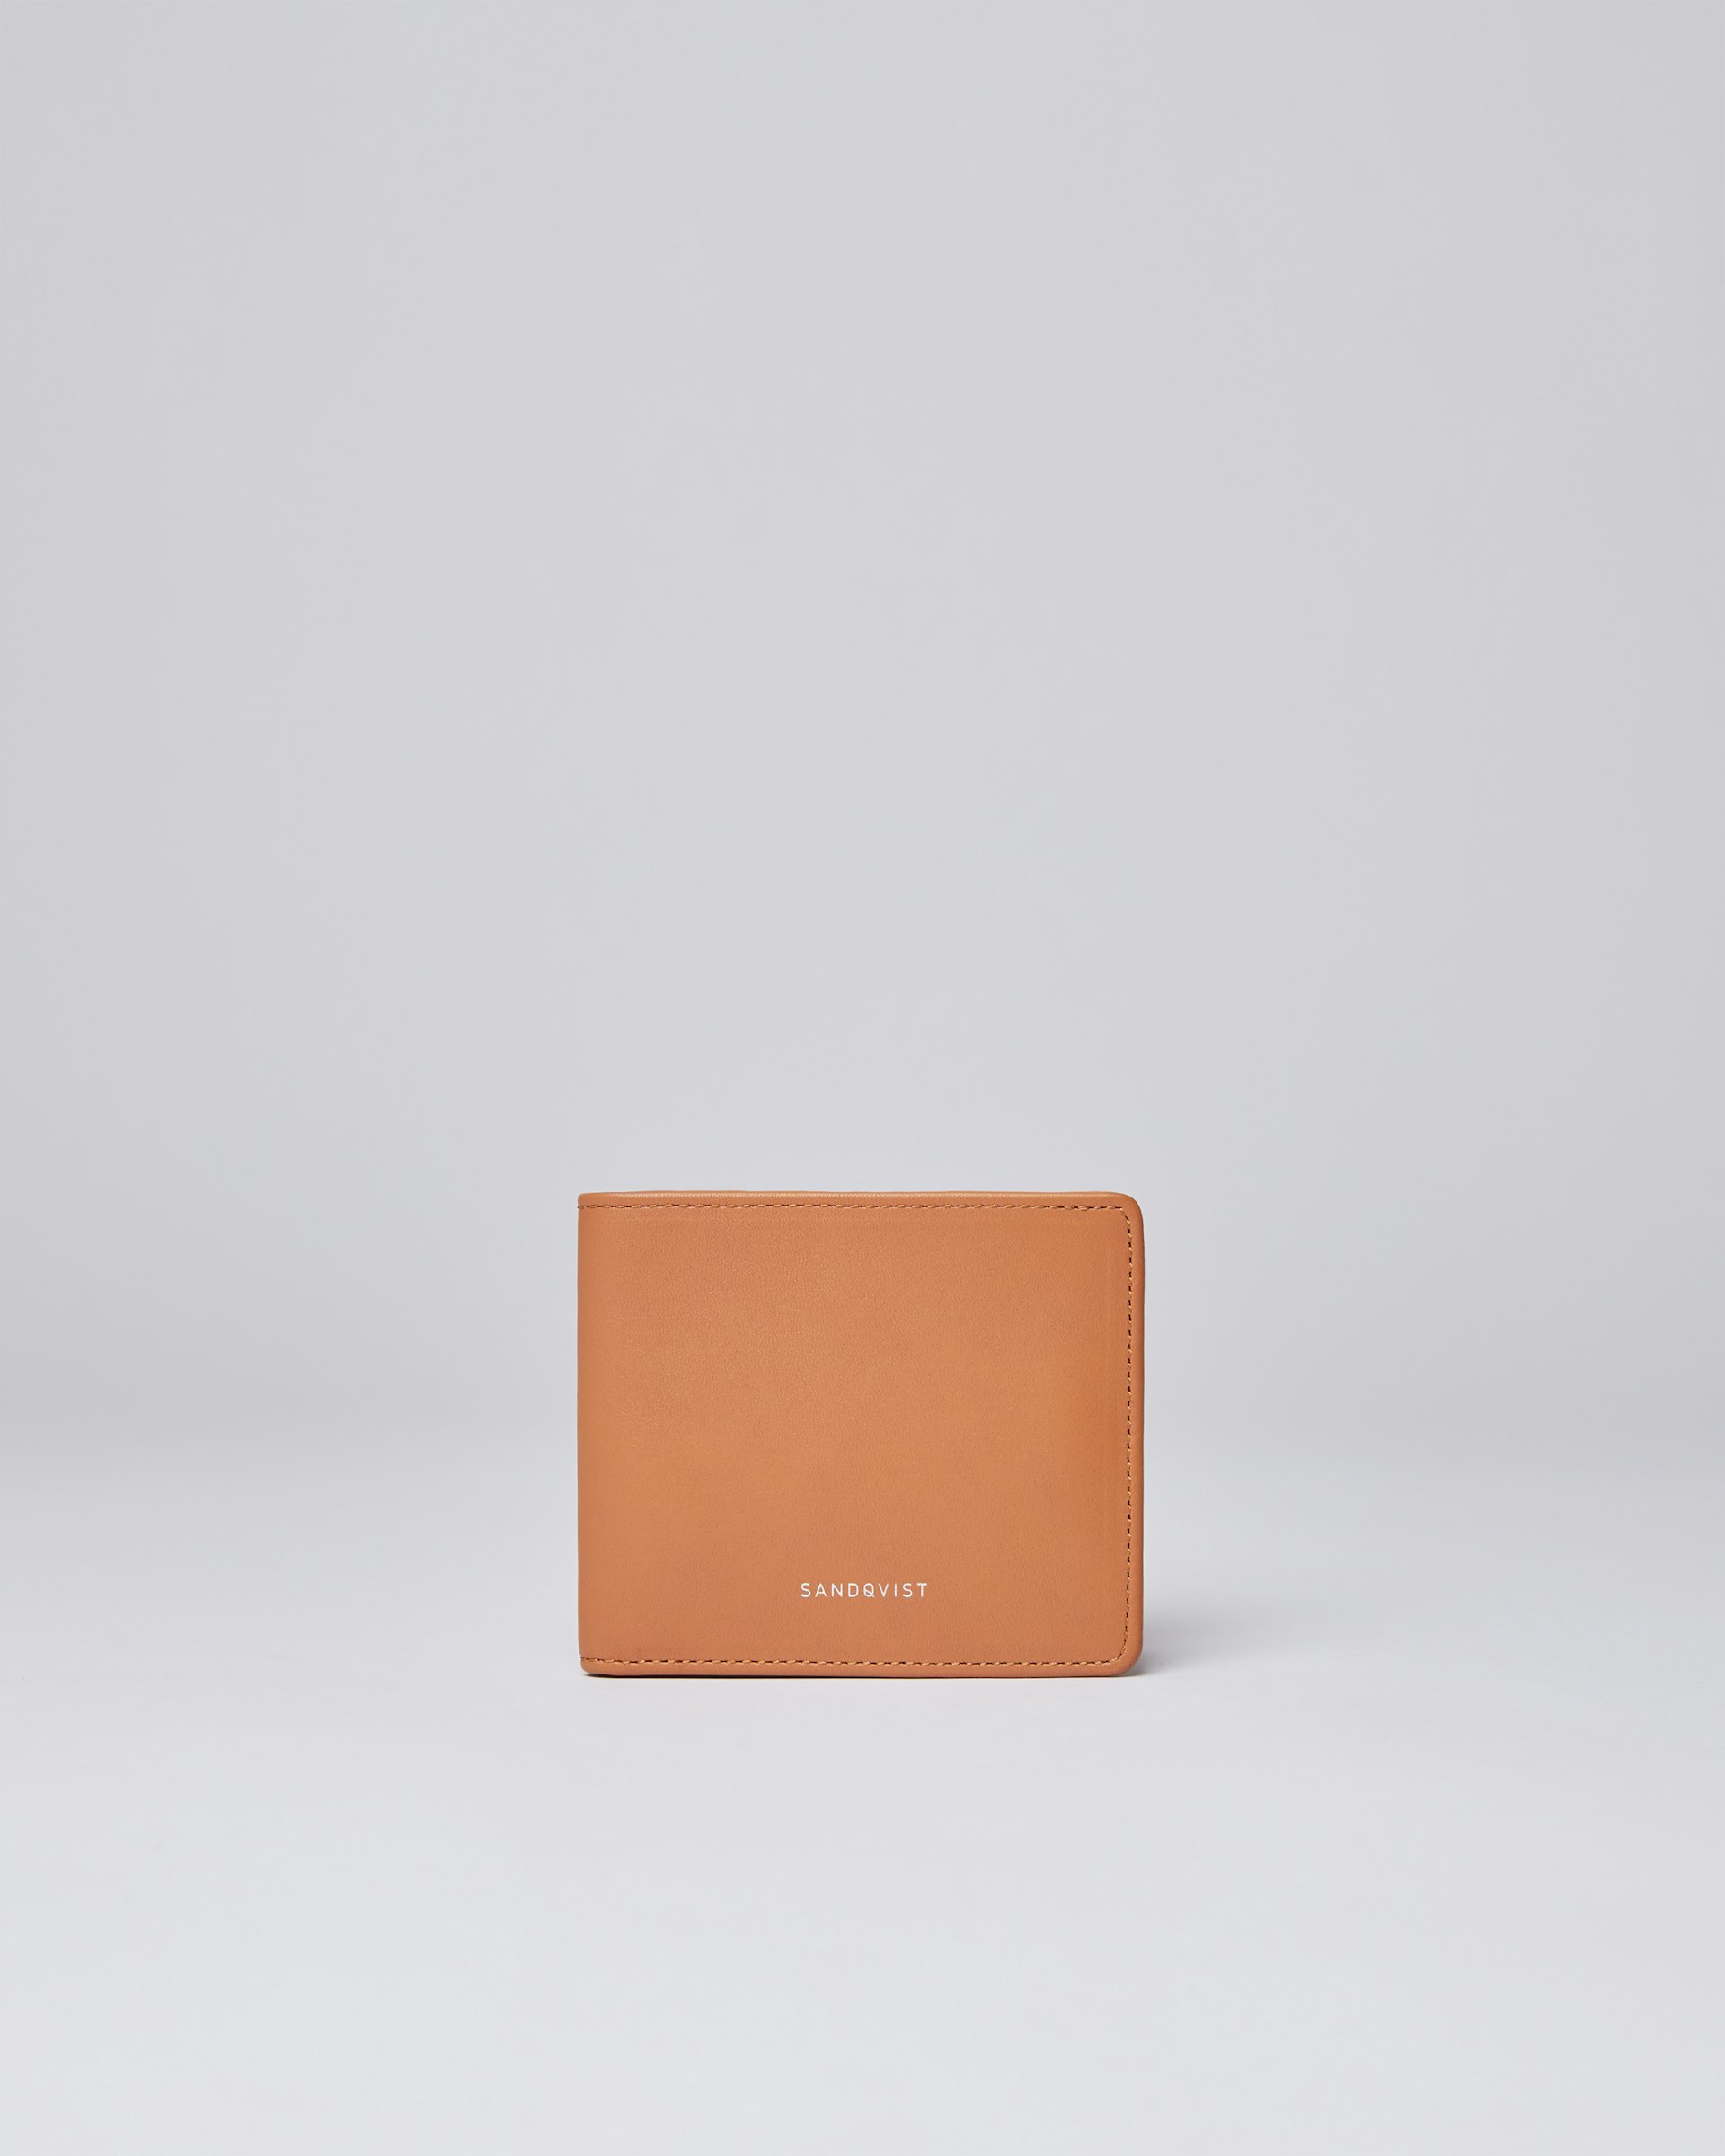 Manfred belongs to the category Wallets and is in color toffee (1 of 3)